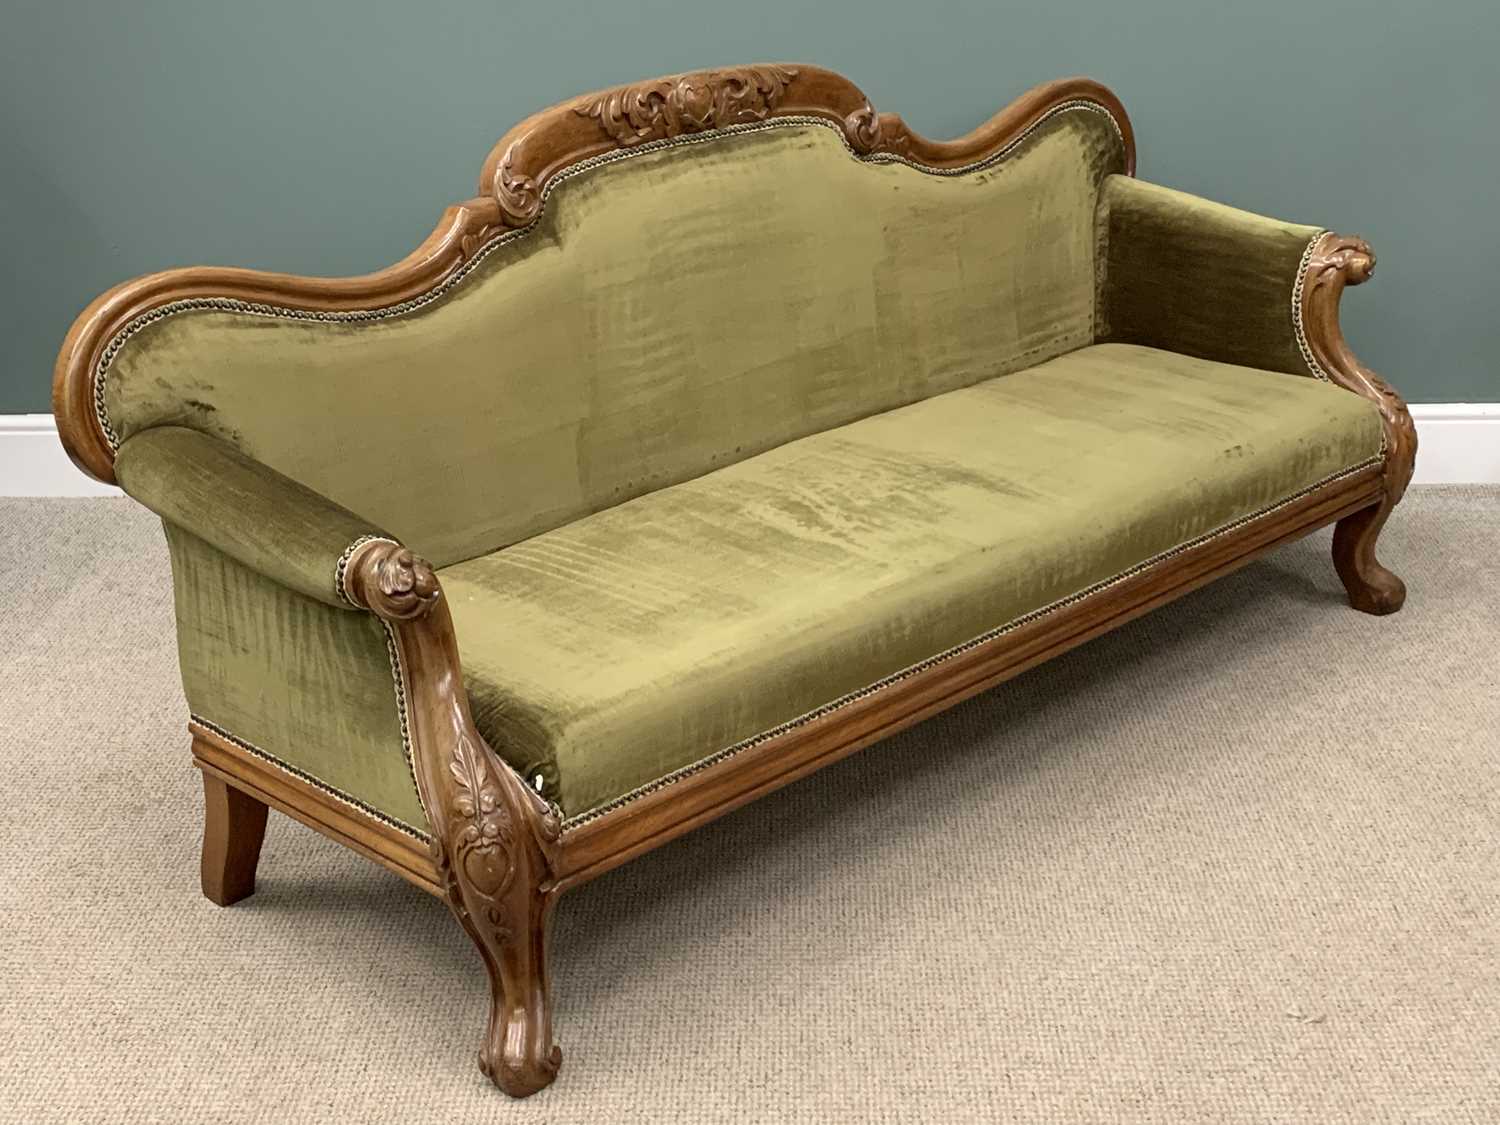 FINE ANTIQUE CARVED WALNUT SOFA with shaped back, on cabriole supports, green dralon upholstery, - Image 3 of 3